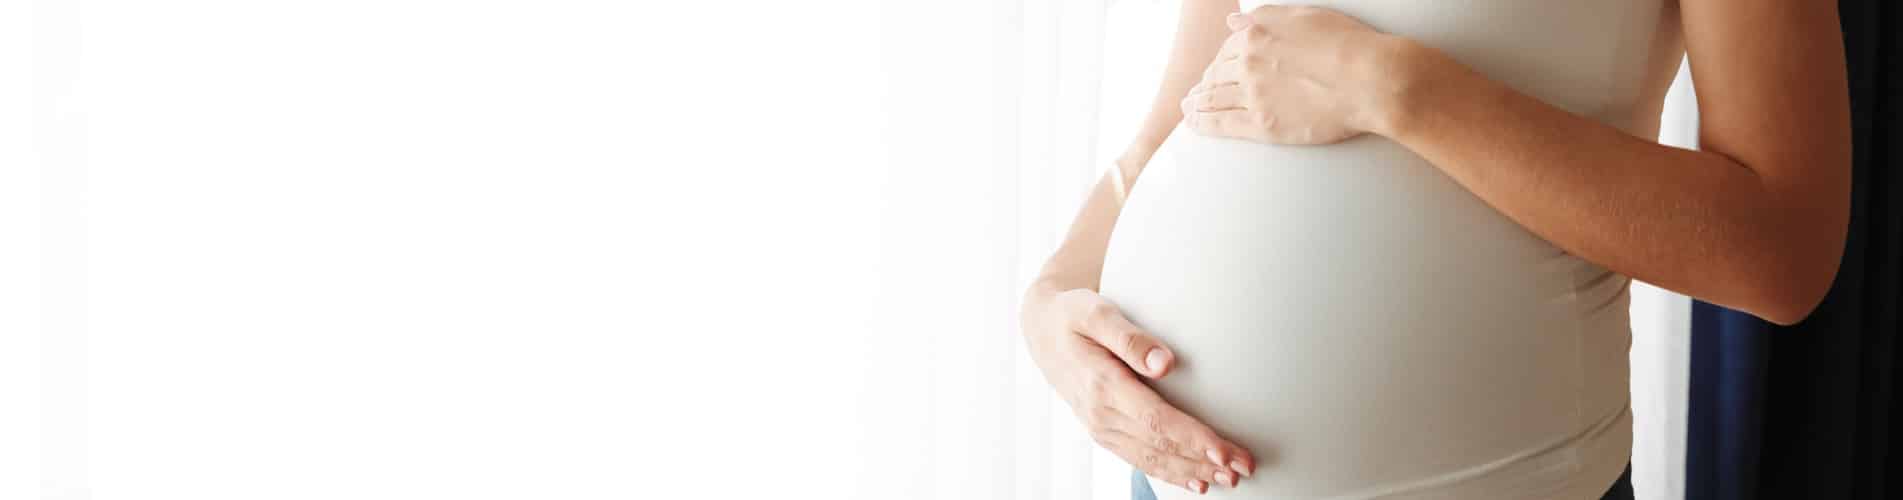 How to Take Care of Your Heart During Pregnancy